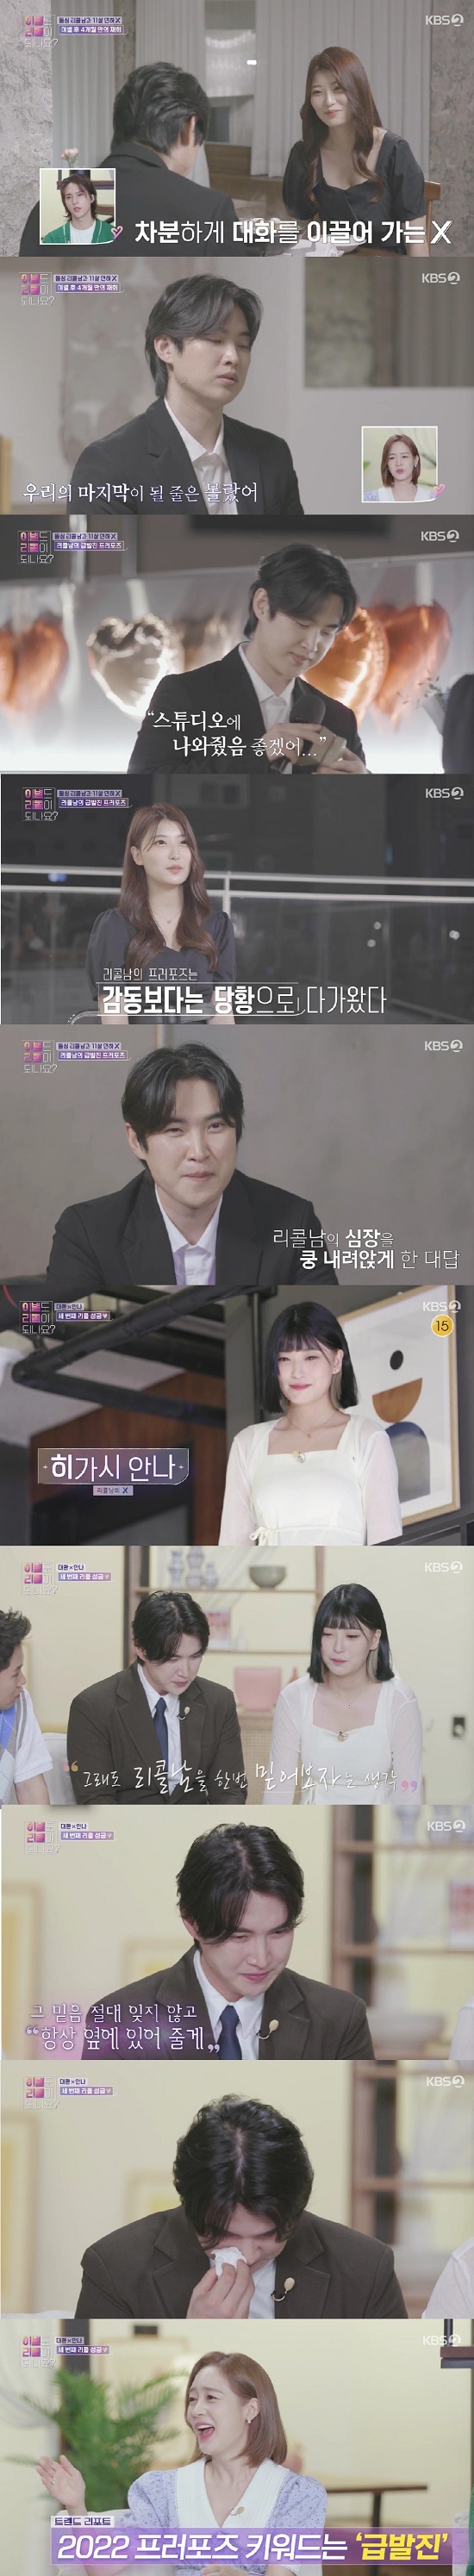 KBS Does the breakup also be recalled? on the 26th? (hereinafter referred to as Breakup Crédit Agricole) revealed the story of Crédit Agricolenam, who broke up with X because of work under the theme of work and love.Crédit Agricolenam, who confessed to the two children on the show, told the story of his love from X to his farewell after his divorce.Its not a big deal, its been a job, Crédit Agricolenam said of the decisive moment that broke up.Yang Se-hyeong explained the situation where he had to work busy, referring to child support.Crédit Agricolenam was surprised to find that X was 25 years old and that he was 11 years old.Later, a meeting between Dolsing Crédit Agricolenam and 11-year-old X was drawn; Crédit Agricolenam said: I didnt know this would end.I dont know what to do, but I wasnt even brave.(X) I thought that I had packed my baggage and that I had taken all my memories and wanted to run away to me that much. X said, I honestly do not think there are many people who can understand that I can not contact you during the Twenty Four Hours.Choi Yoo-jung said, Are you crazy? And Jang Youngran also said, Is not it too much?Crédit Agricolenam then made a sudden event for X, and X said in an interview, I thought there was something, but I did not expect it to be a proposal.Its a big embarrassment, and frankly, he said.You said you were here today preparing, right? Ive got one more, Crédit Agricolenam said.Son Dong-woon expressed anxiety about the sudden event, saying, Is not it a song?The cast members who still saw the look of the bad X were surprised to say Do not do it, followed by Jang Youngran, I am so bad at expression, and Sung Yu-ri responded, Why am I so ashamed?Crédit Agricolenam continued the song event on the look of an unknown X.He said, I would like you to go to the studio if you look at all the times you had today with your brother, and think about it slowly.X replied, Ill think about it. In the interview, X replied just about what was memorable, and then I felt that my brother was nervous.I felt nervous because I was not good at starting the song. I think I still need a little time to think. As for the worrying part, X said, I think my parents will oppose it. I am a first marriage, my opponent is divorced, and there are not many parents who like to hear that they have children.My parents also want me not to suffer, so I think they will object. Crédit Agricolenam said, I was 100% sure until I did the proposal, but it seemed to be half a half after singing. The last answer was also Ill think about it.X later appeared in the studio, and chose to reunite; Crédit Agricolenam was greatly surprised by this and said, I knew it would not come out.Jang Youngran said, Suddenly, I was proposal, so I looked at it.X replied, It was embarrassing, but replied, I thought my brother planned this and spent time for me.Yang Se-hyeong voiced Crédit Agricolenam, saying, If you do not spend a lot of time, you should reflect on this and the same mistake should not be repeated.Sung Yu-ri asked, Did you think about marriage? X nodded, saying yes.Then Sung Yu-ri laughed, saying, Now Proposal is rush, its timing and nothing.X said, I thought I should believe it again because it does not seem to be just words. Crédit Agricolenam, who was impressed by this, shed tears saying, I will always be next to you.I am going to ask you to show you that I have a contract with my house, I have confidence to be sure, and I love X, said Crédit Agricolenam.Photo: KBS 2TV broadcast screen